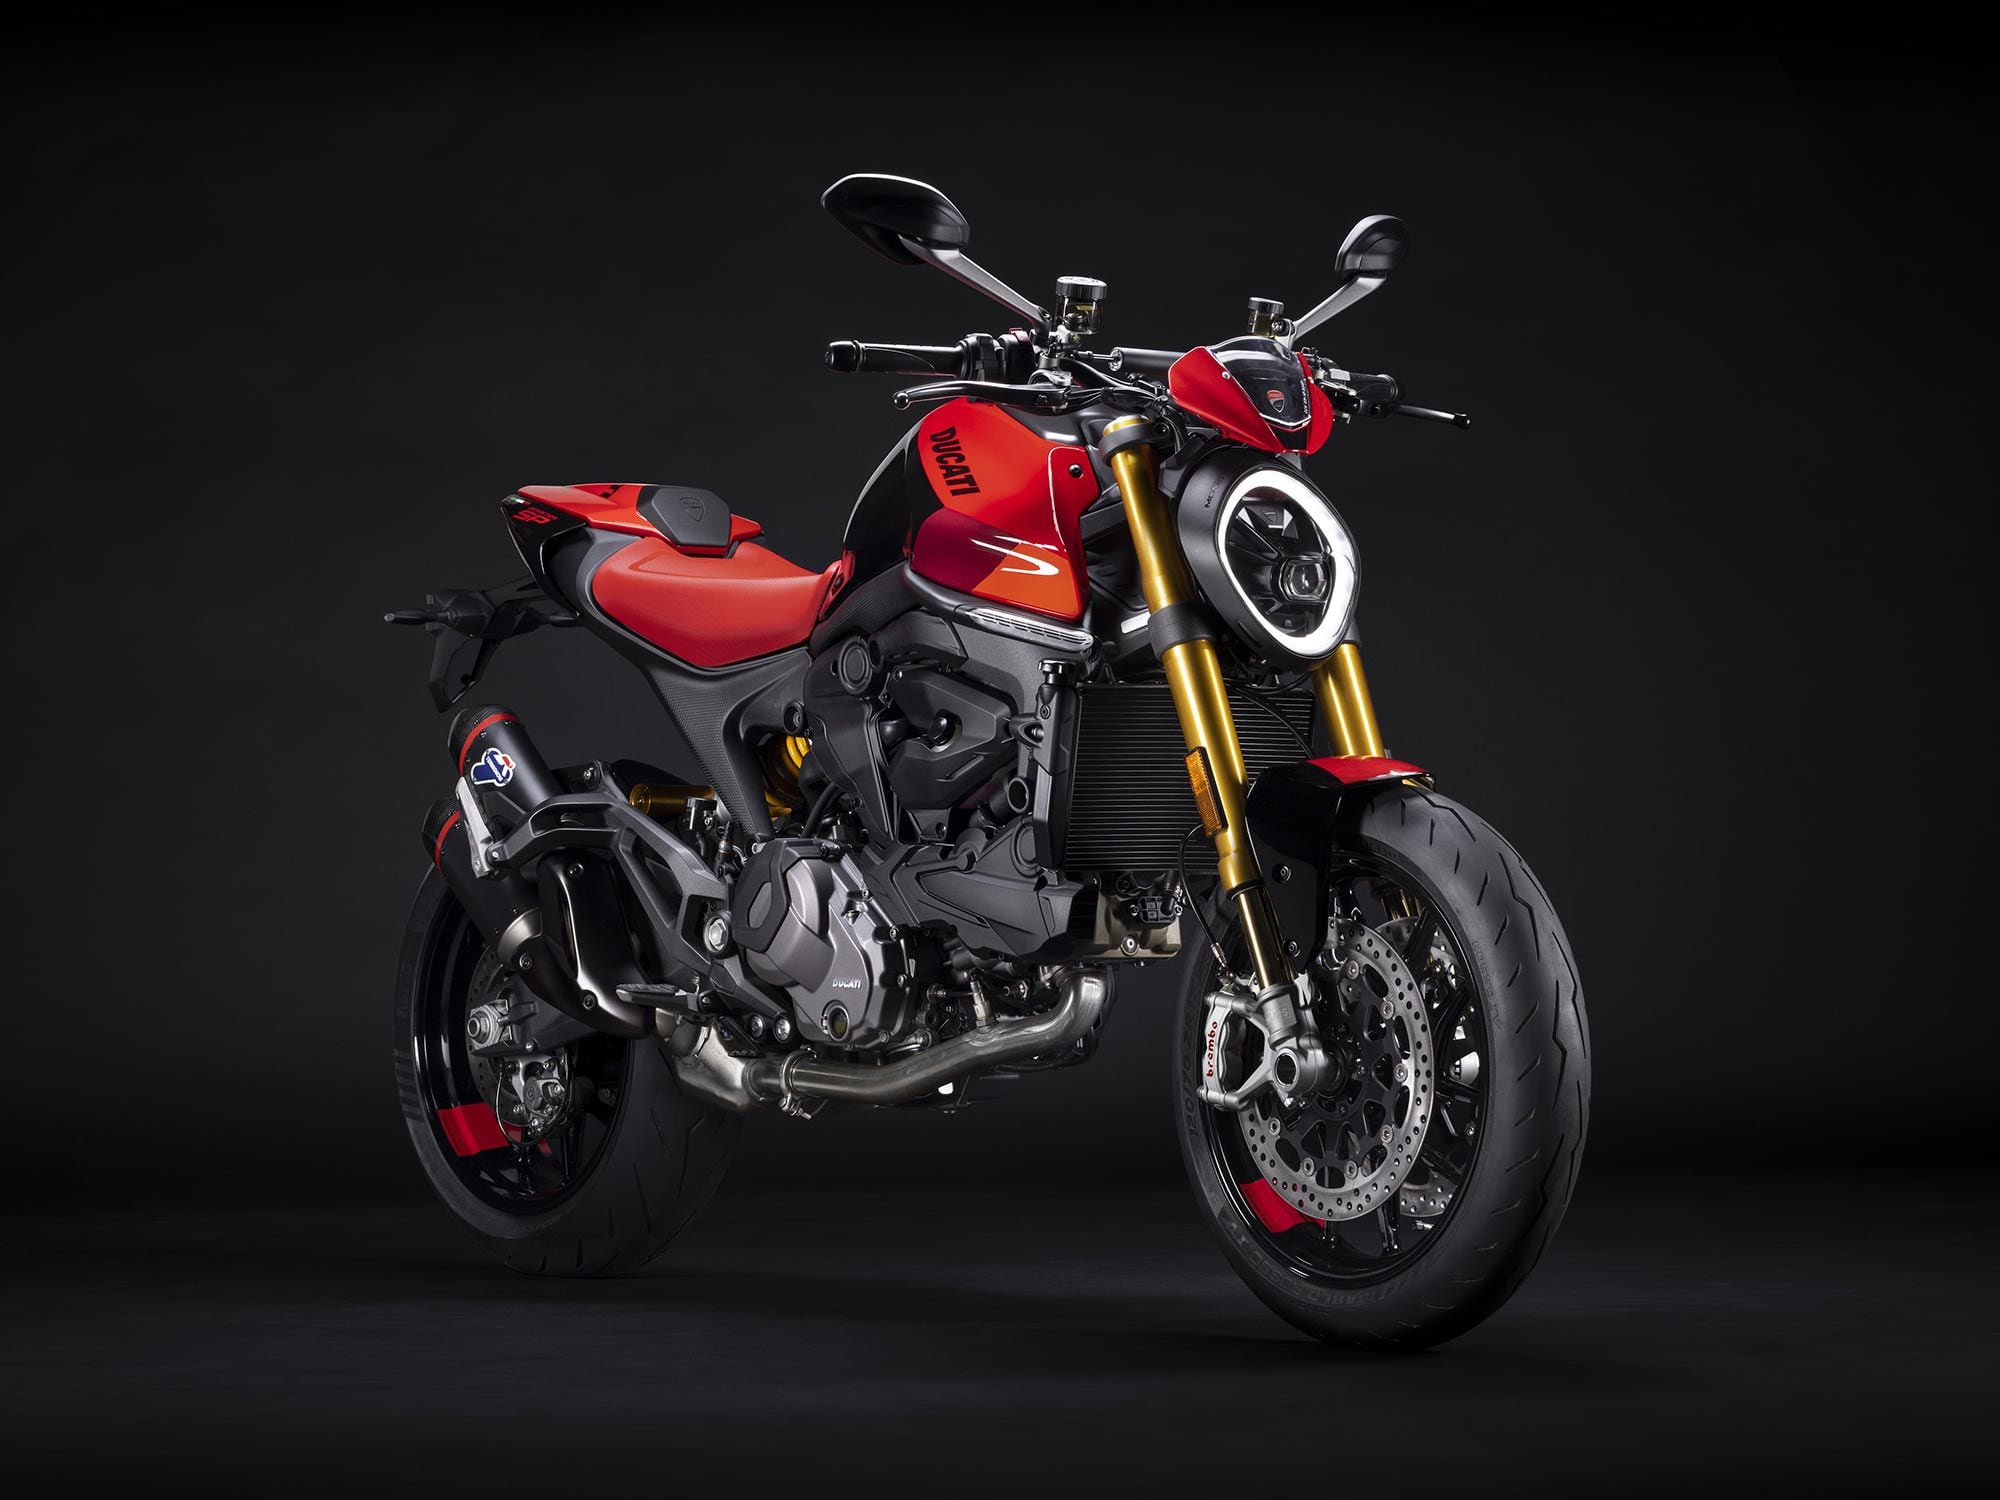 The 2023 Ducati Monster SP will be priced at $15,595.